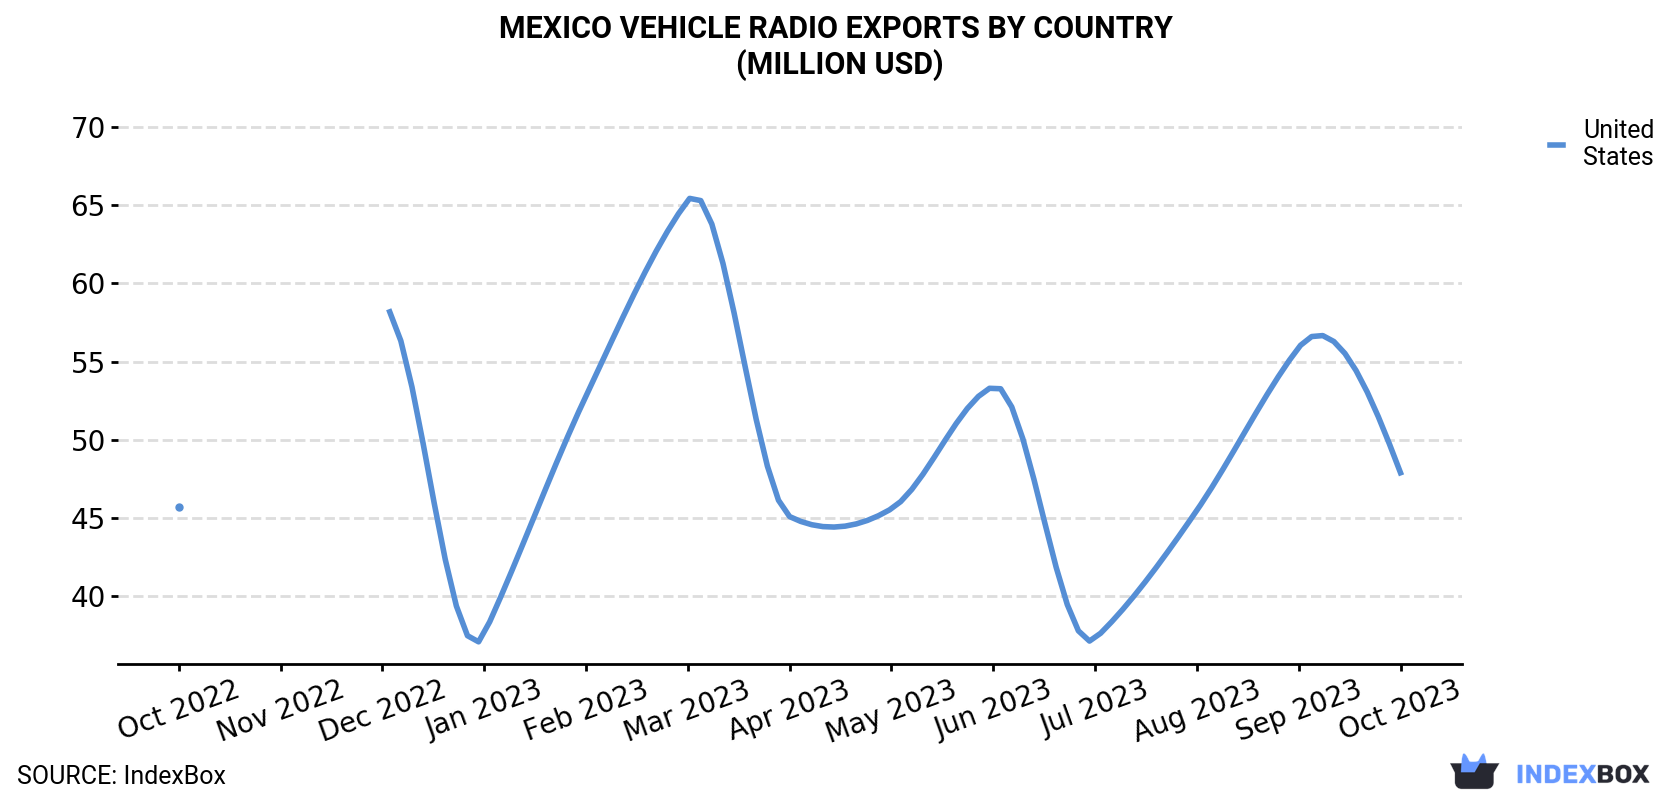 Mexico Vehicle Radio Exports By Country (Million USD)